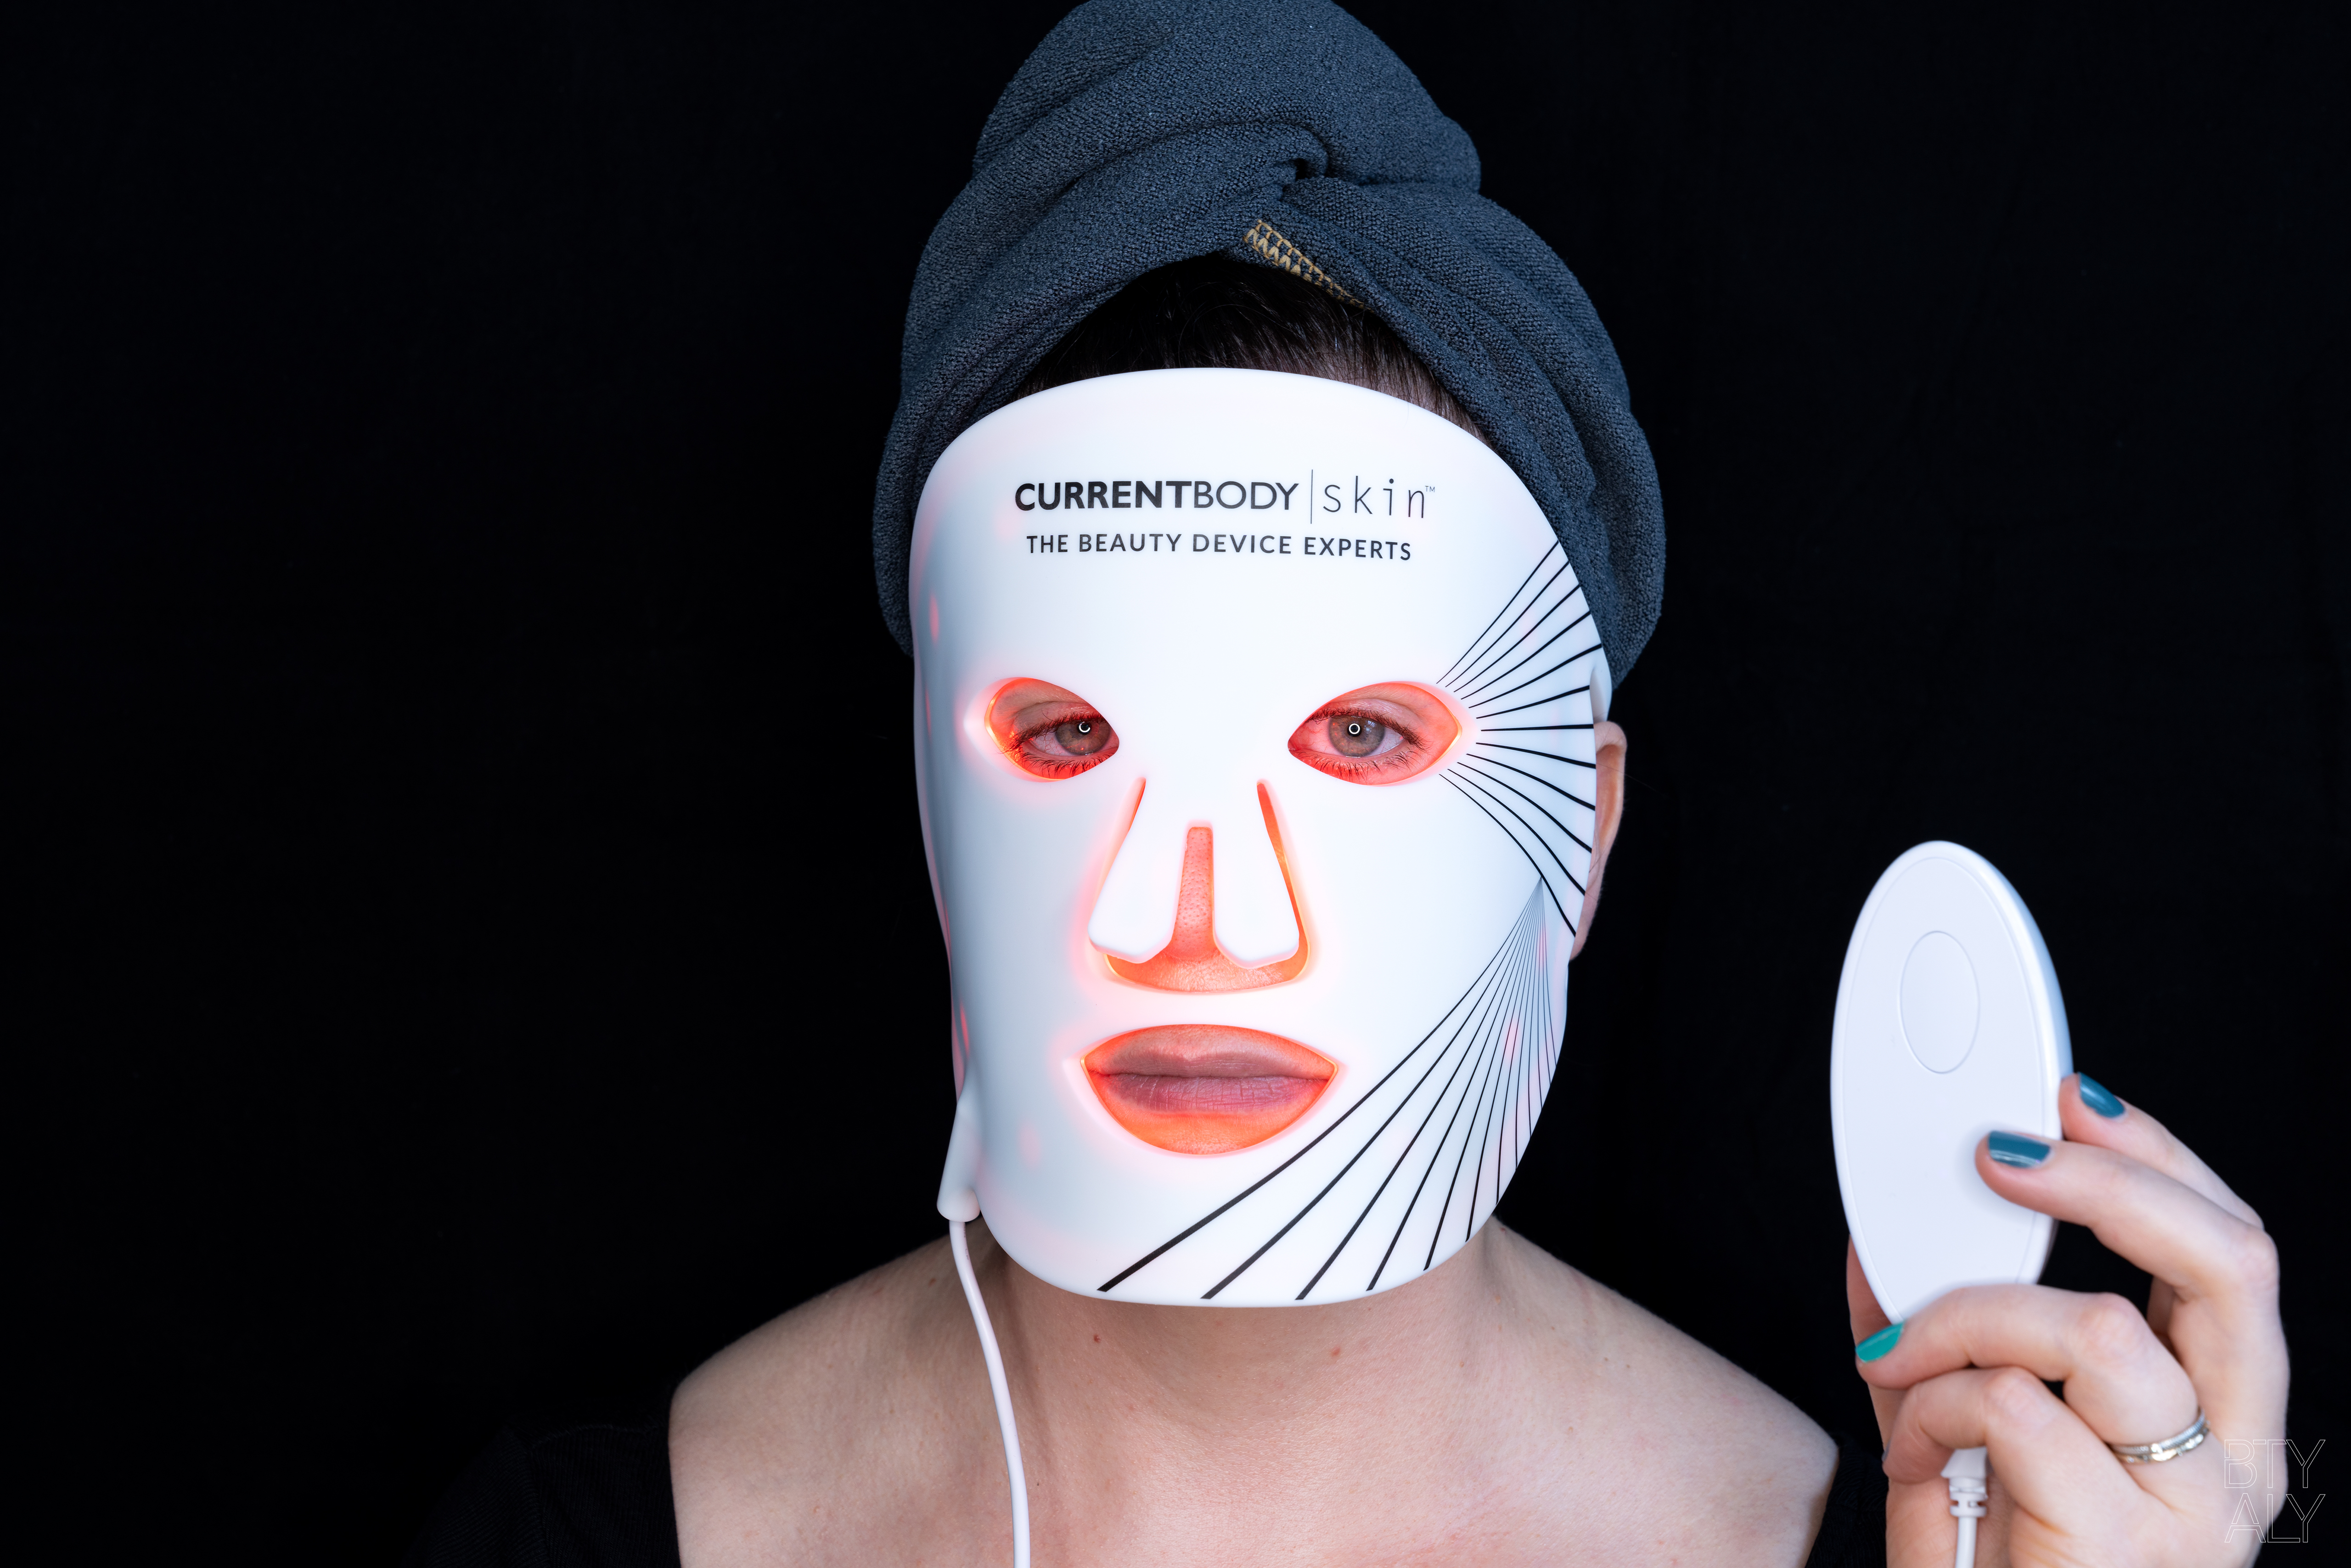 I tried the anti-aging CurrentBody Skin LED mask | BTY ALY